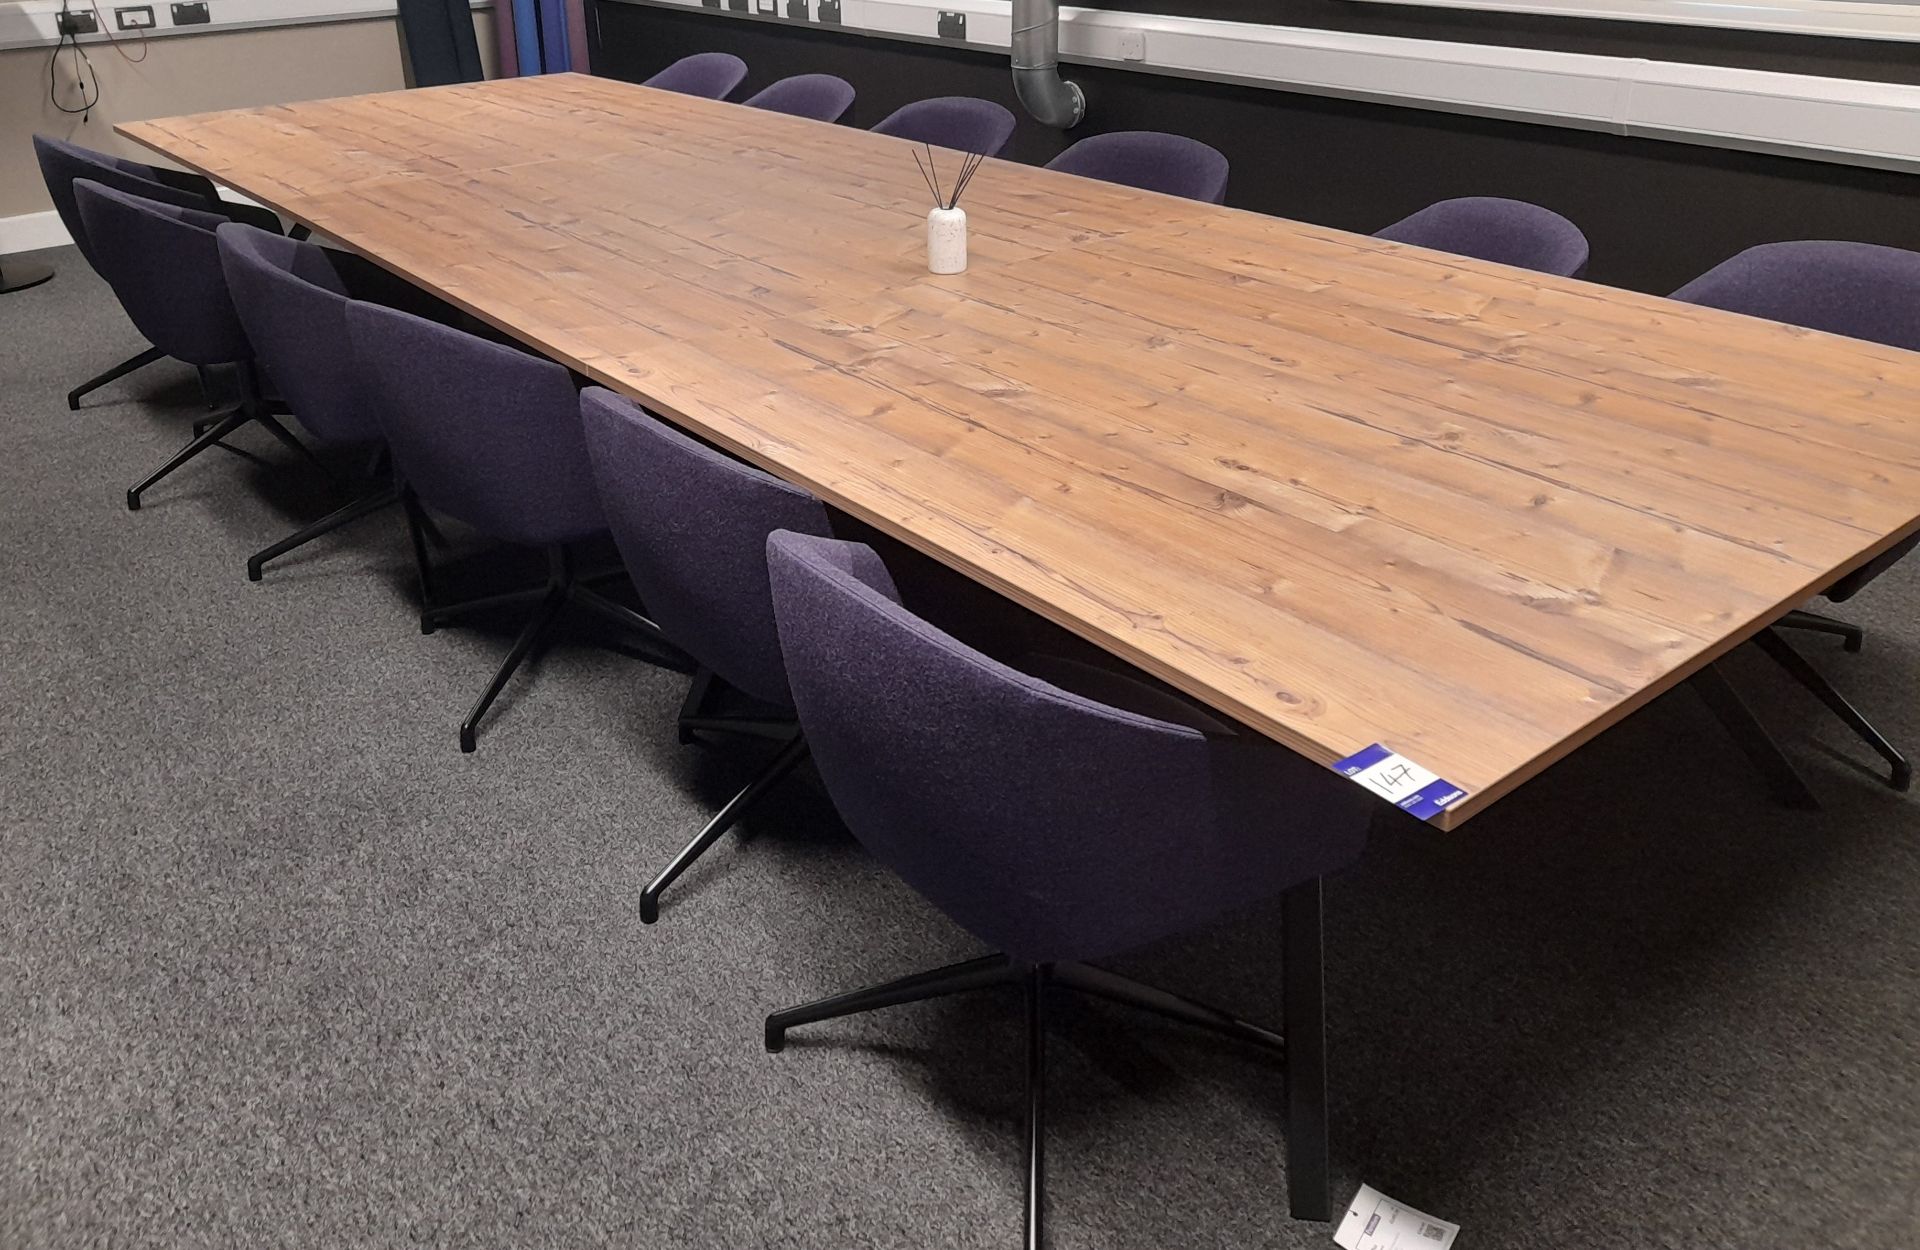 6 x Section boardroom table (Approx. 1600 x 800), with 12 x Swivel tub chairs, located to - Image 2 of 6